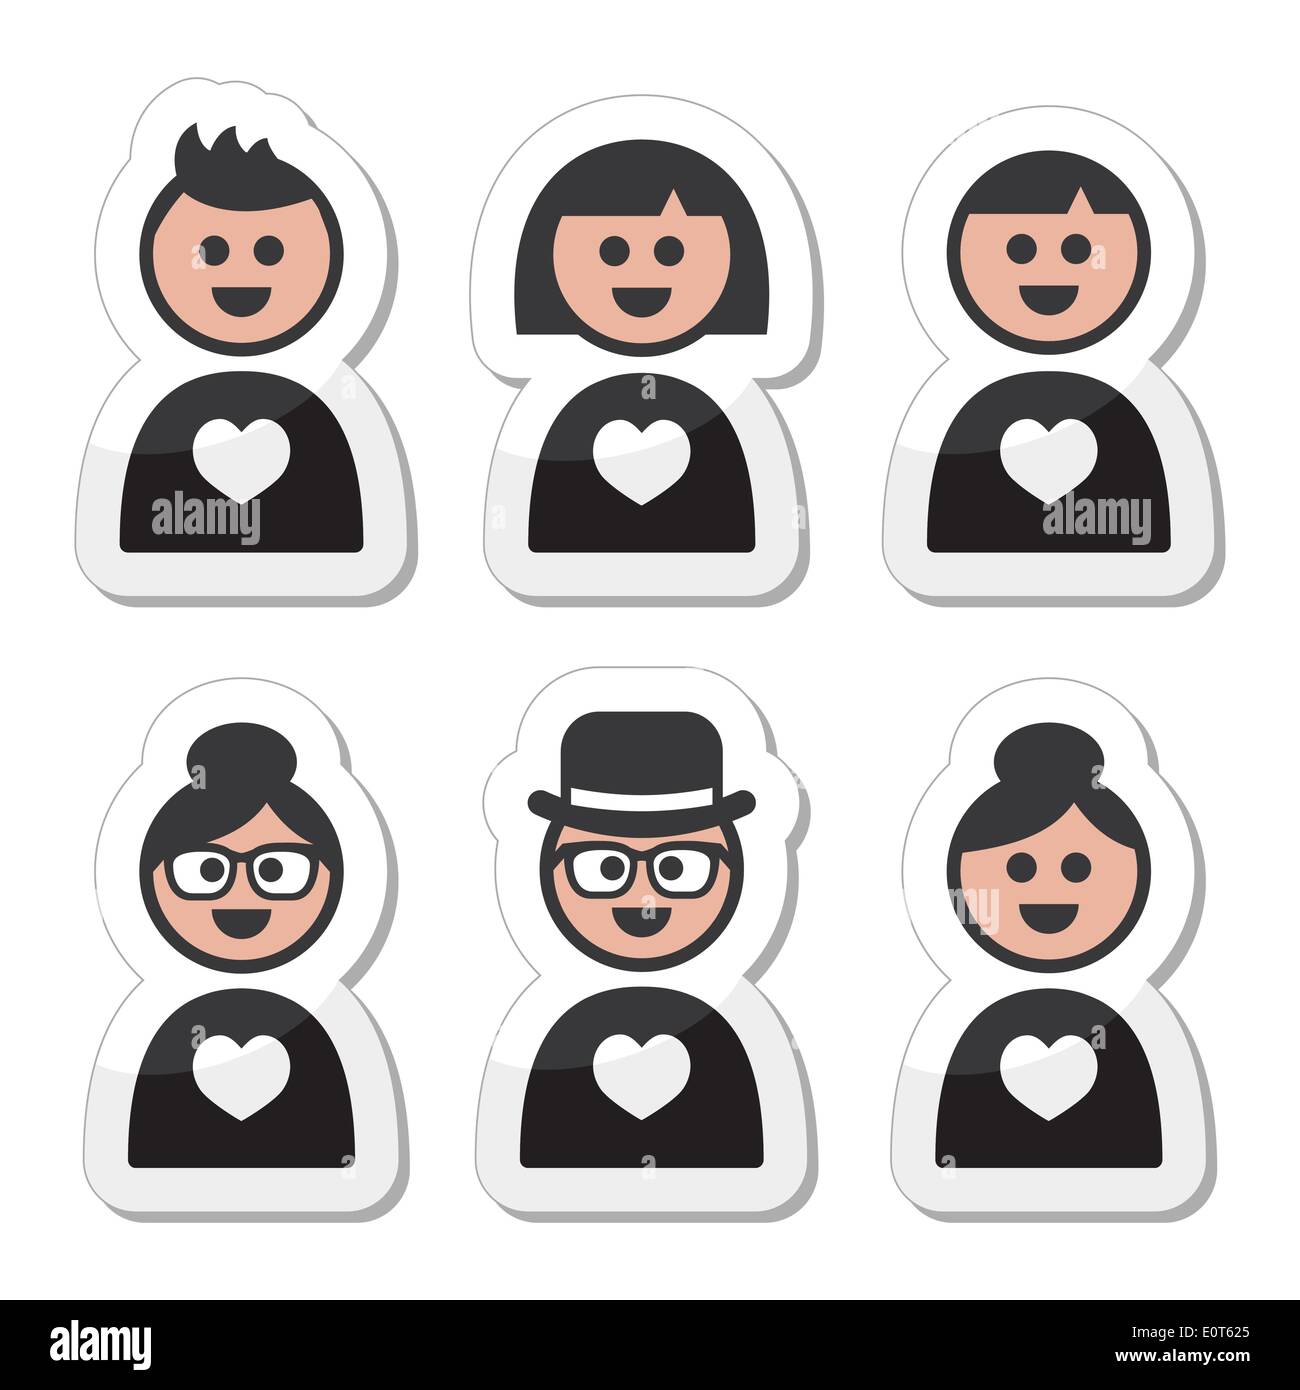 People in love, valentine's day icons set Stock Vector